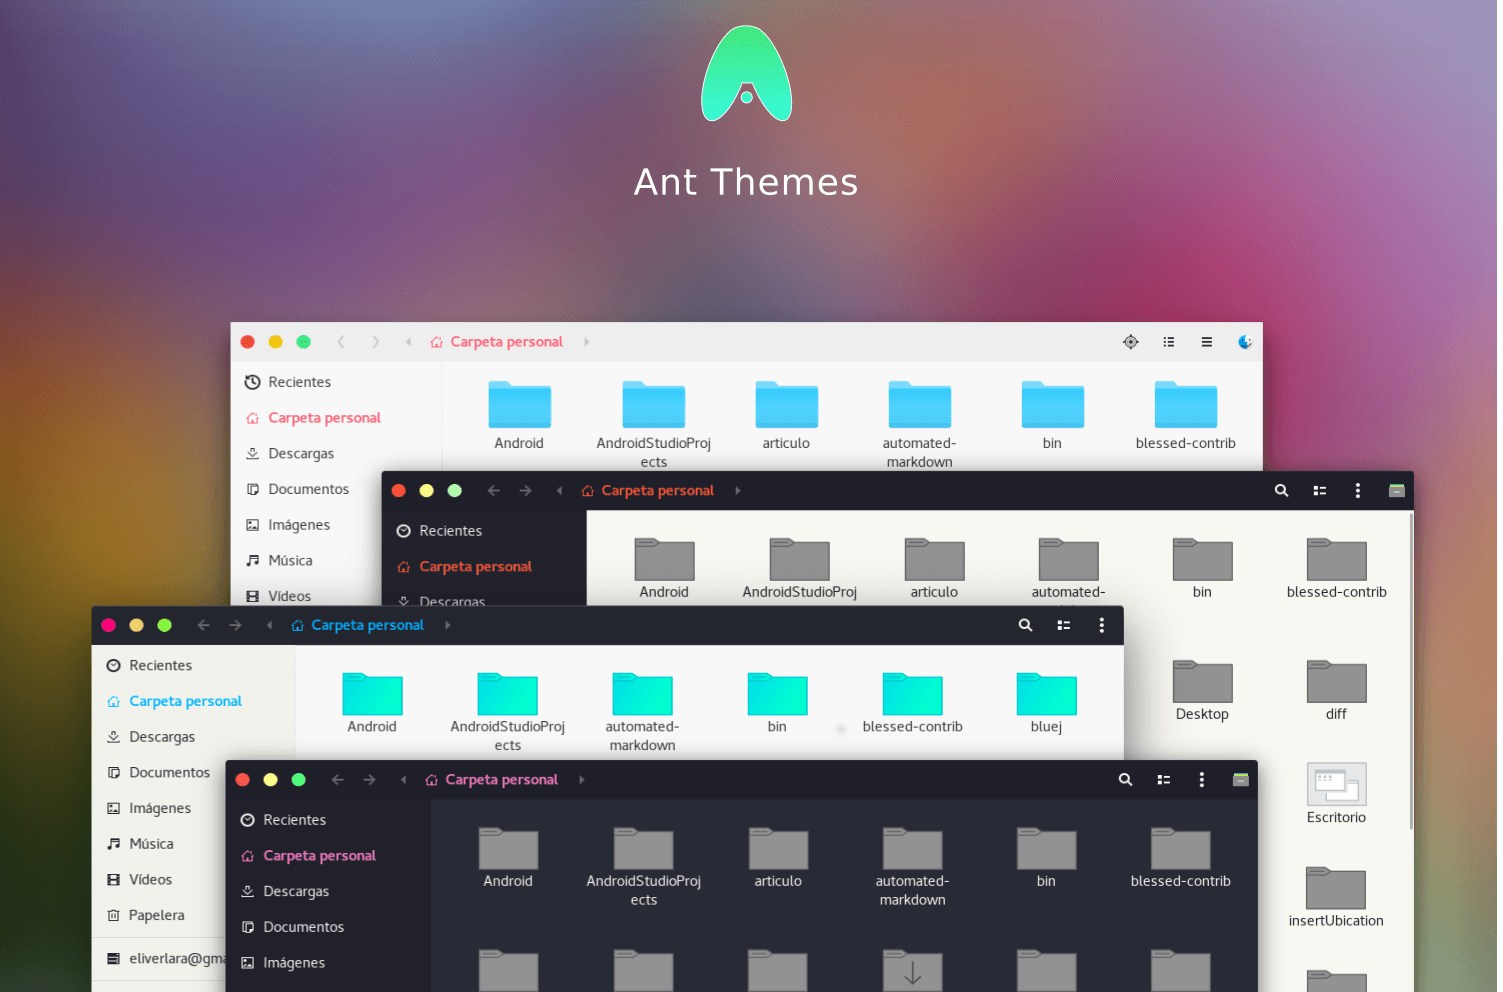 The ant GTK theme -- image from https://www.pling.com